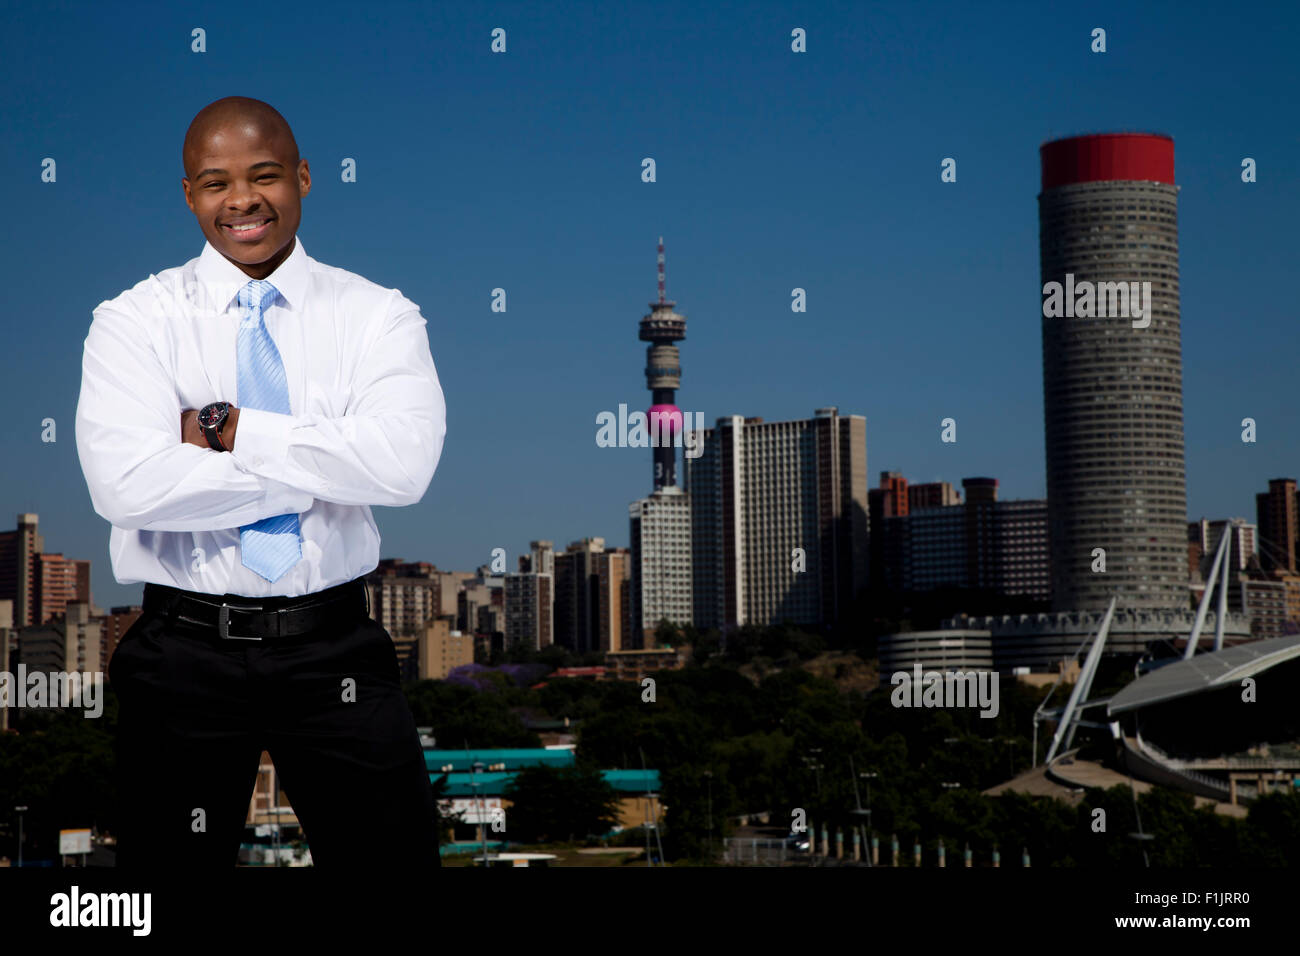 Smartly dressed business man standing with arms crossed with cityscape in background Stock Photo